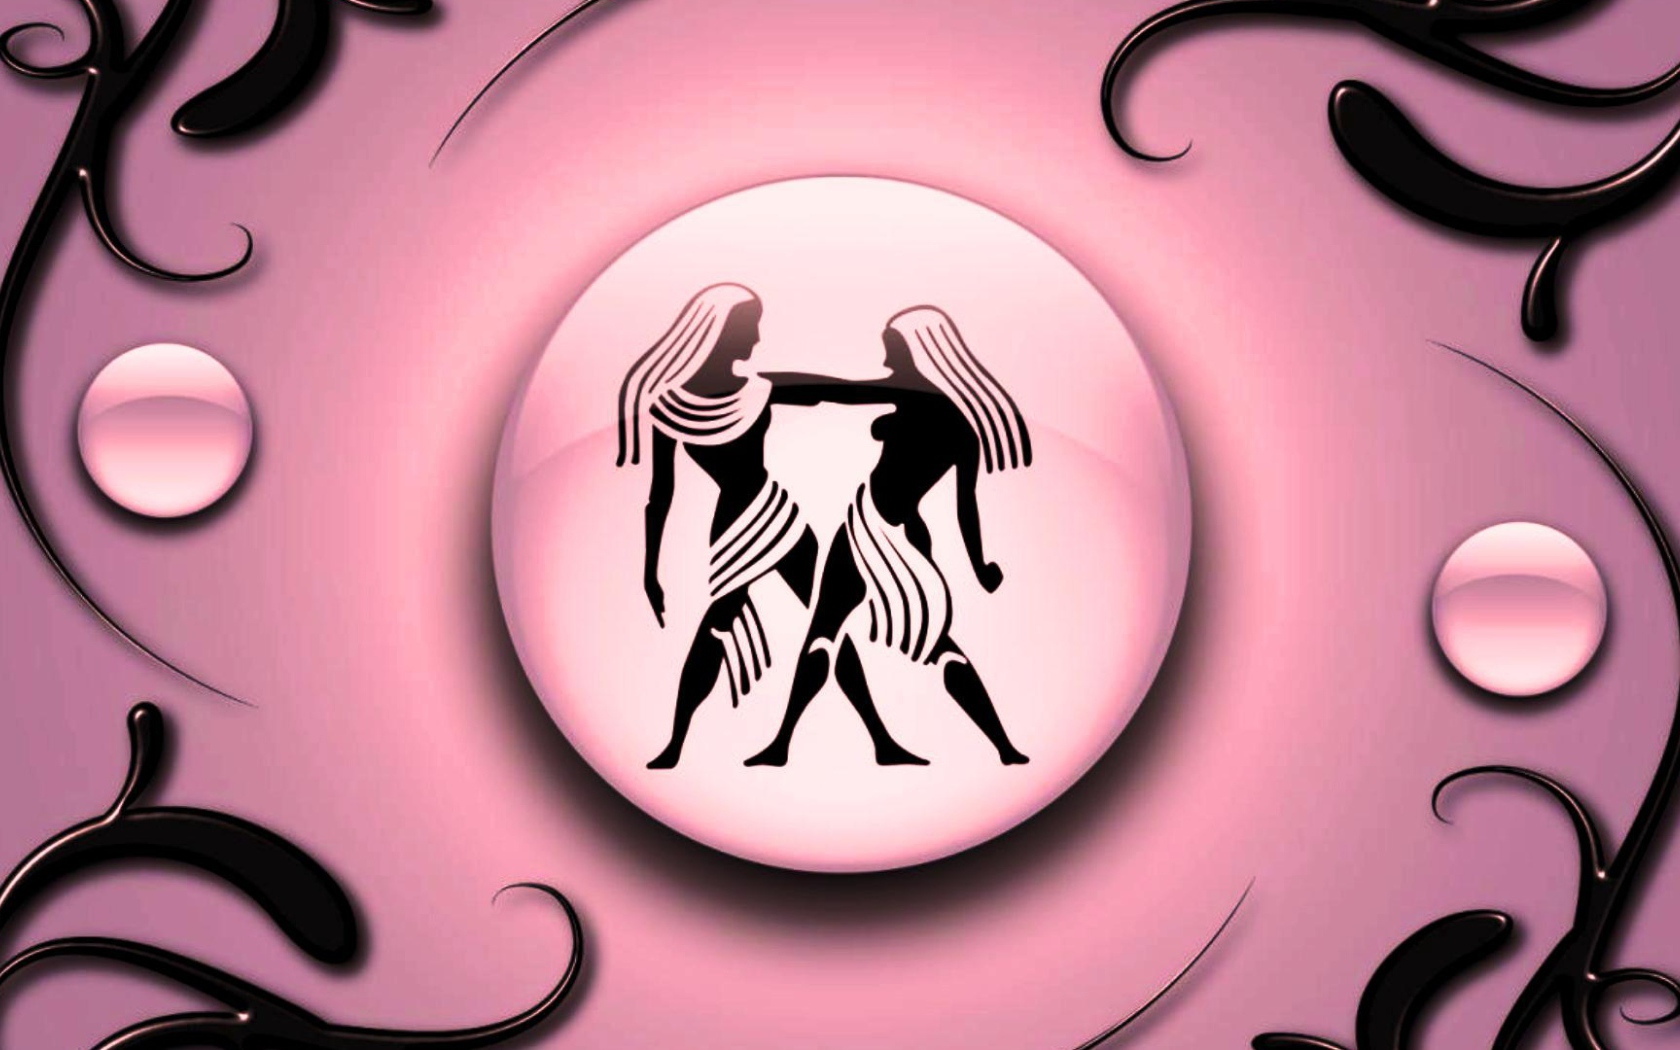 Gemini on a pink background with black ornament Desktop wallpapers 1680x1050